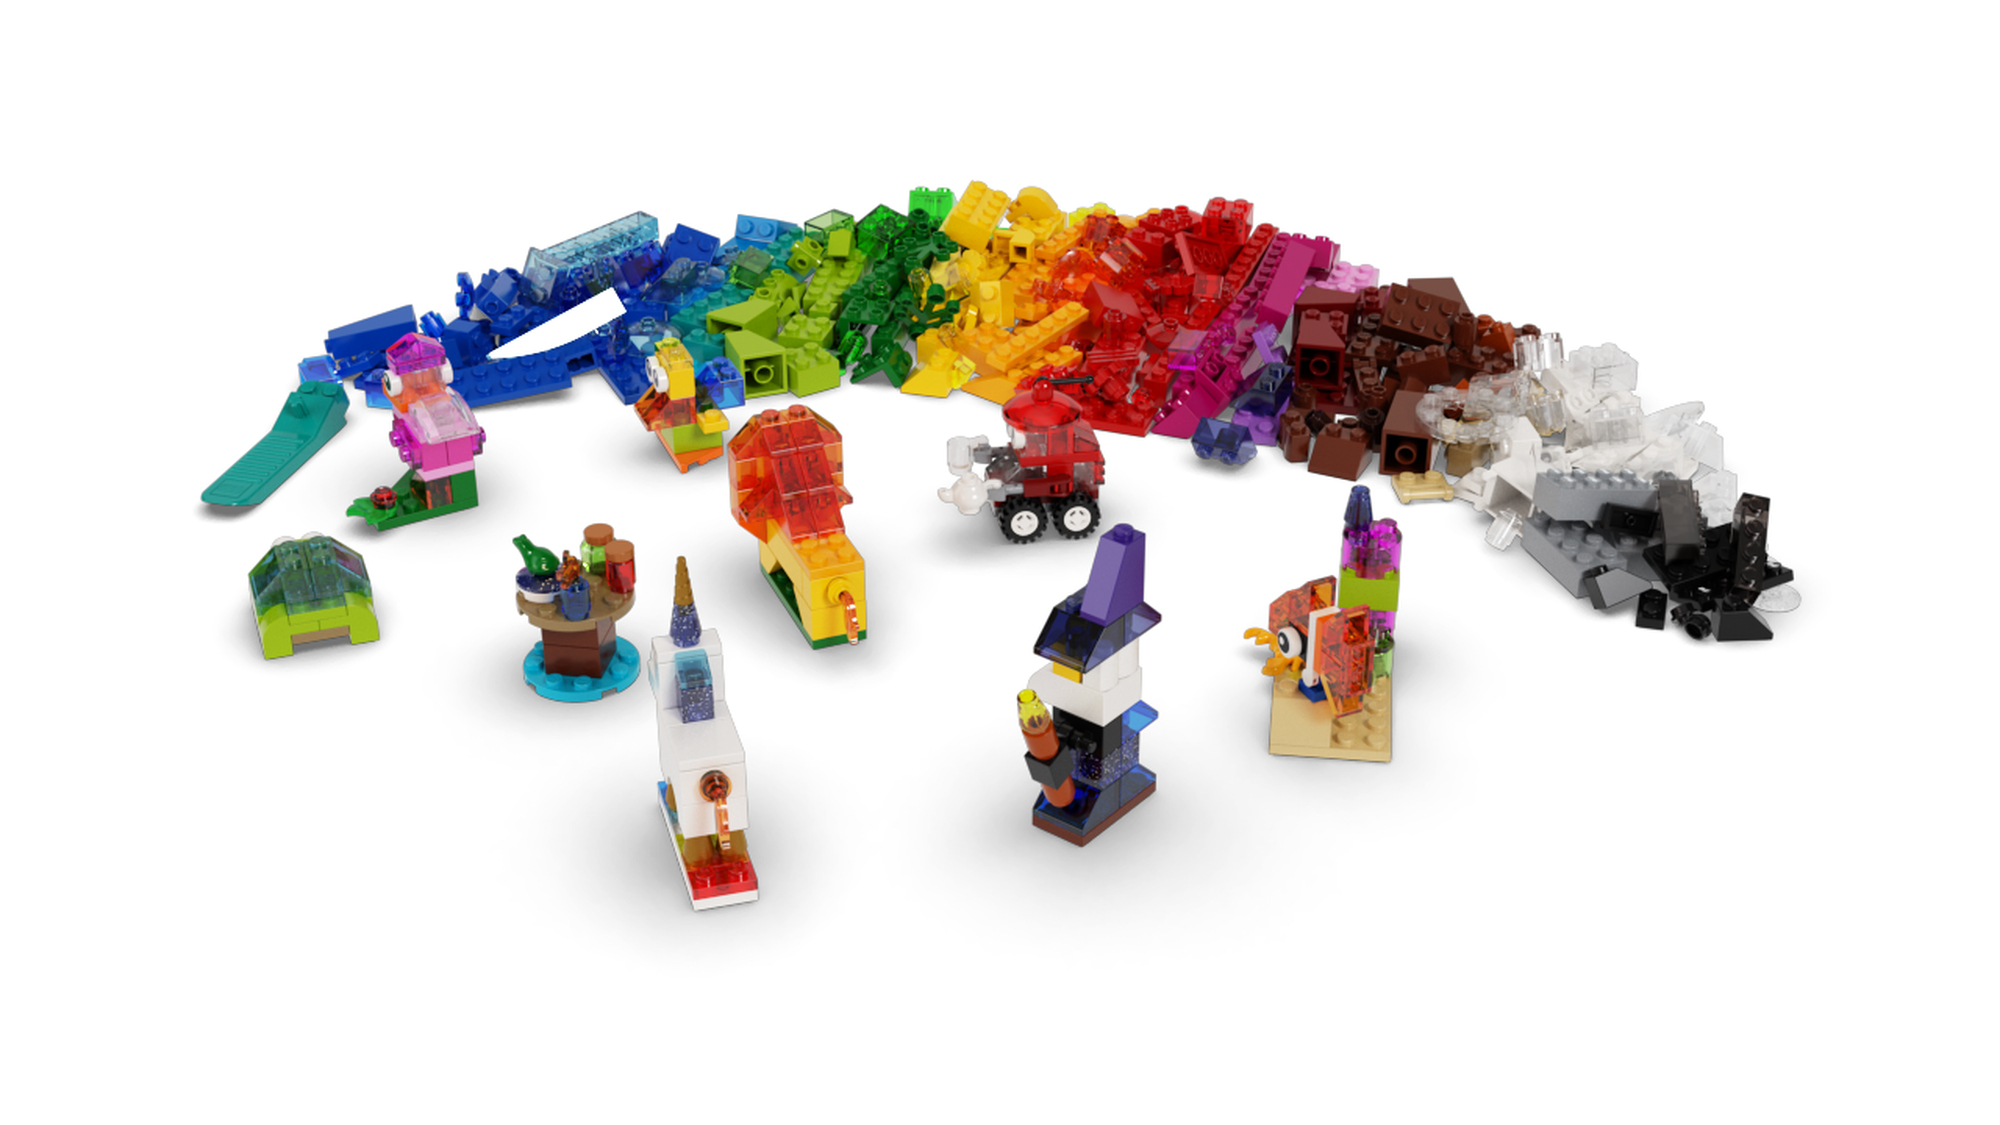  LEGO Classic Creative Transparent Bricks Building Set 11013 for  Girls and Boys, STEM Toy and Preschool Hands-On Learning Toy, Includes  Wizard, Unicorn, Lion, Bird, and Turtle : Toys & Games